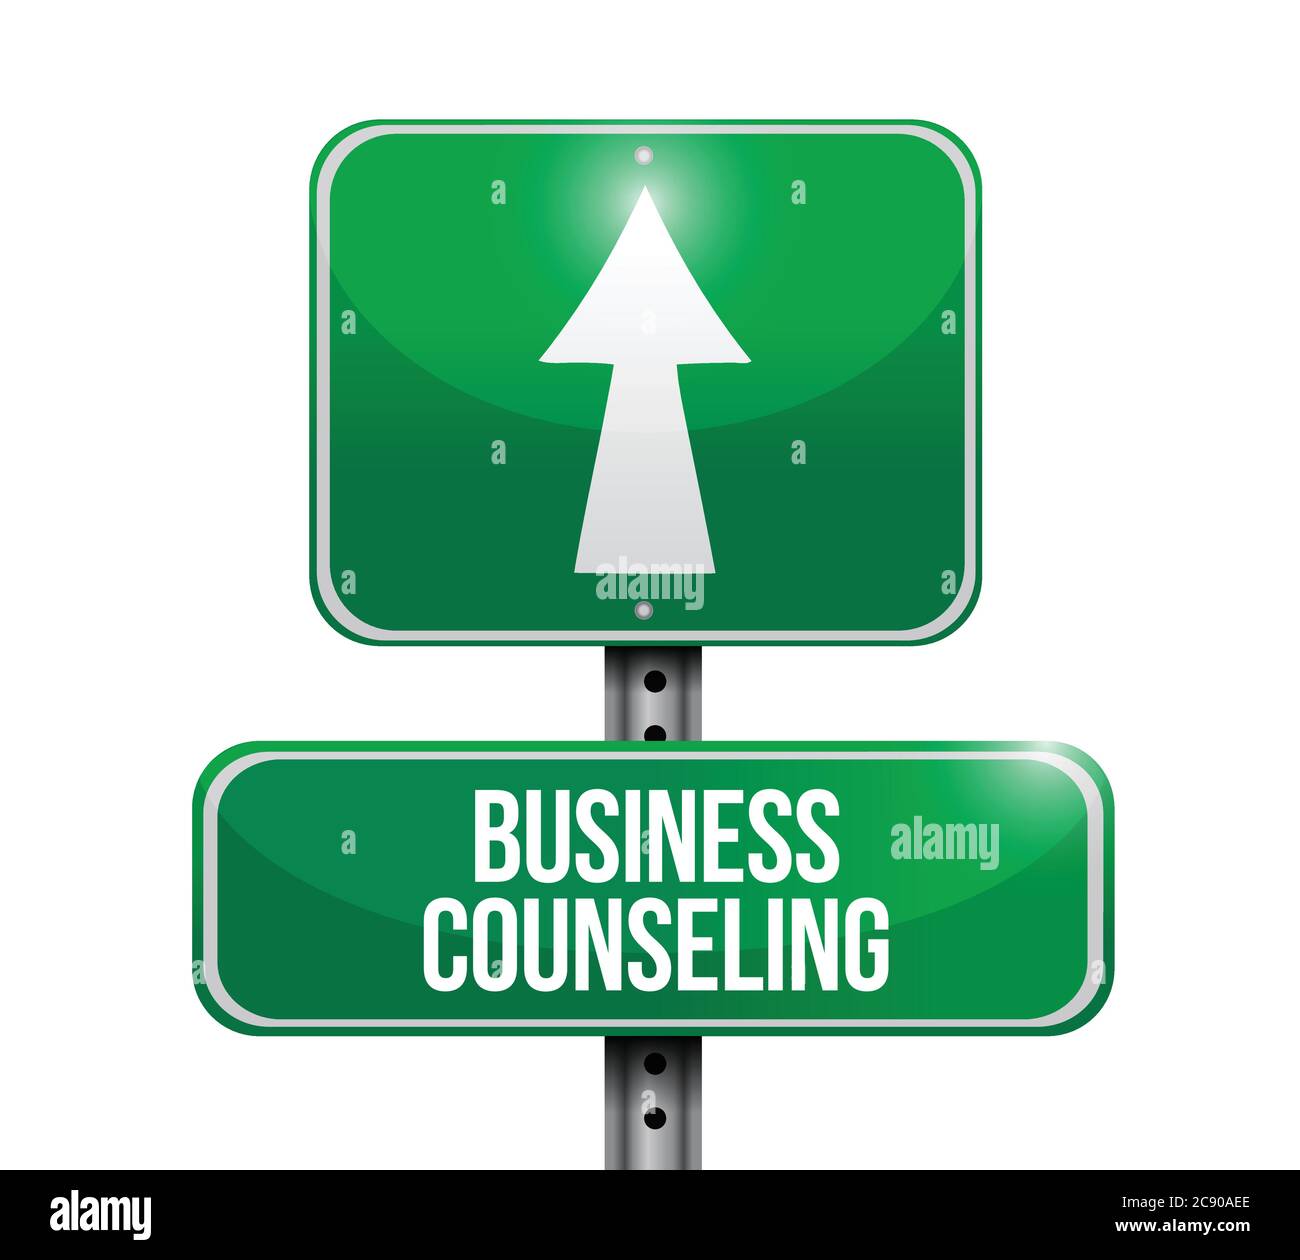 Business counseling road sign illustration design over a white background Stock Vector